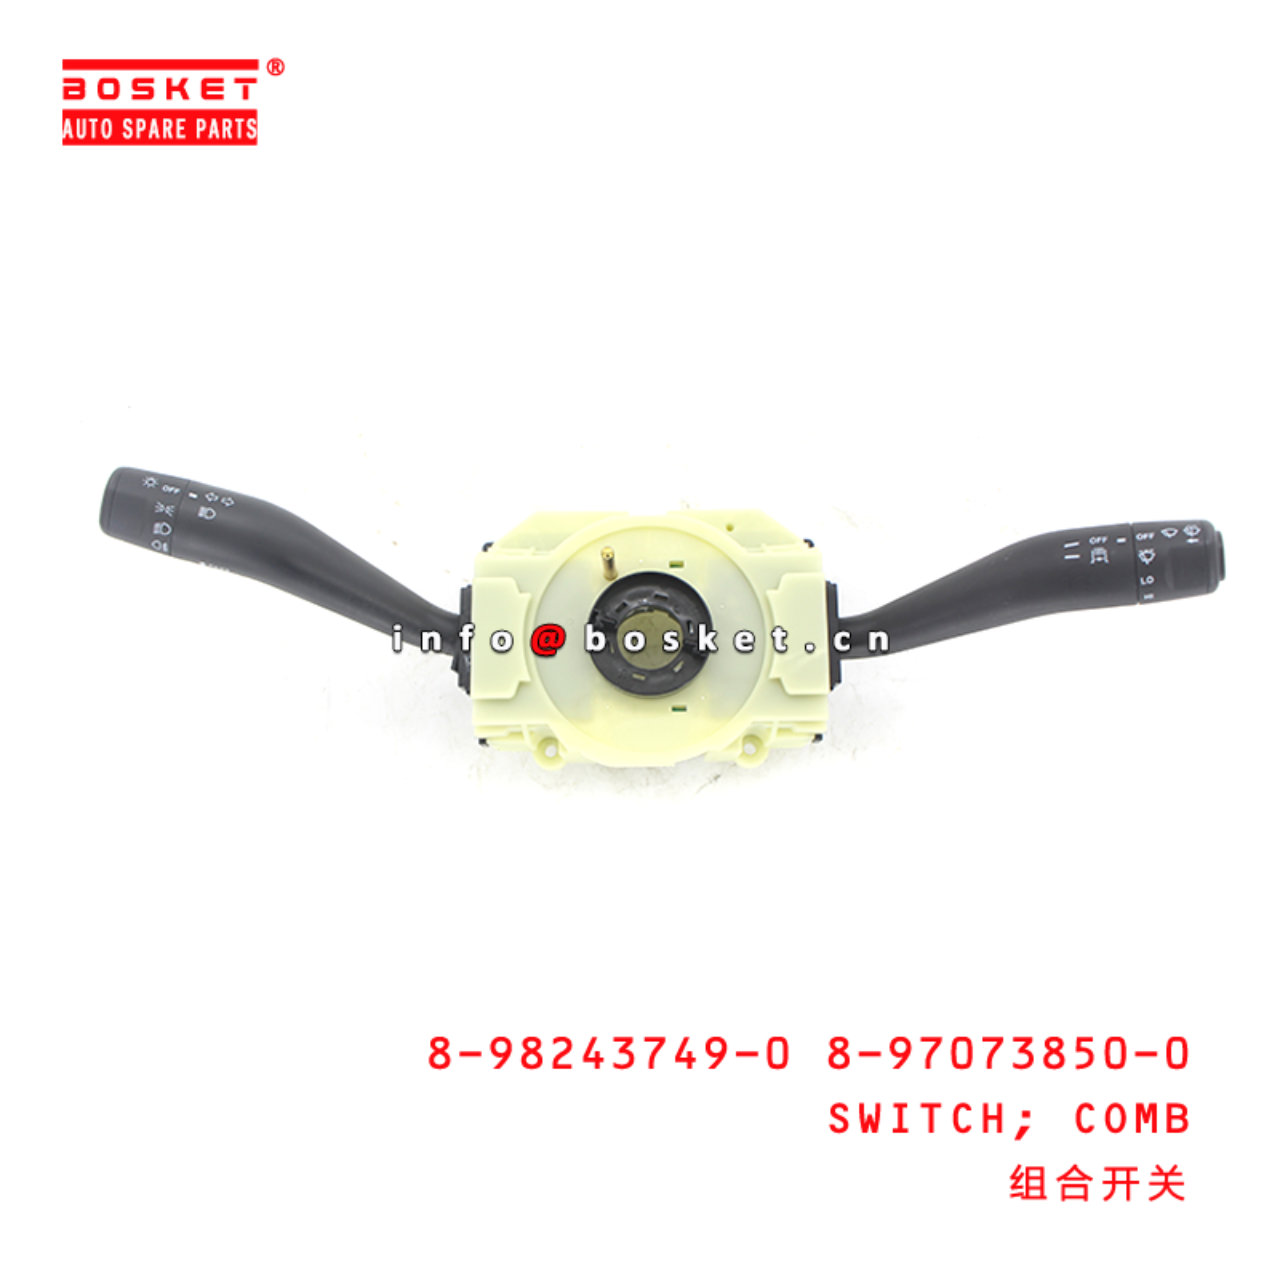 8-98243749-0 8-97073850-0 Combination Switch Suitable for ISUZU 